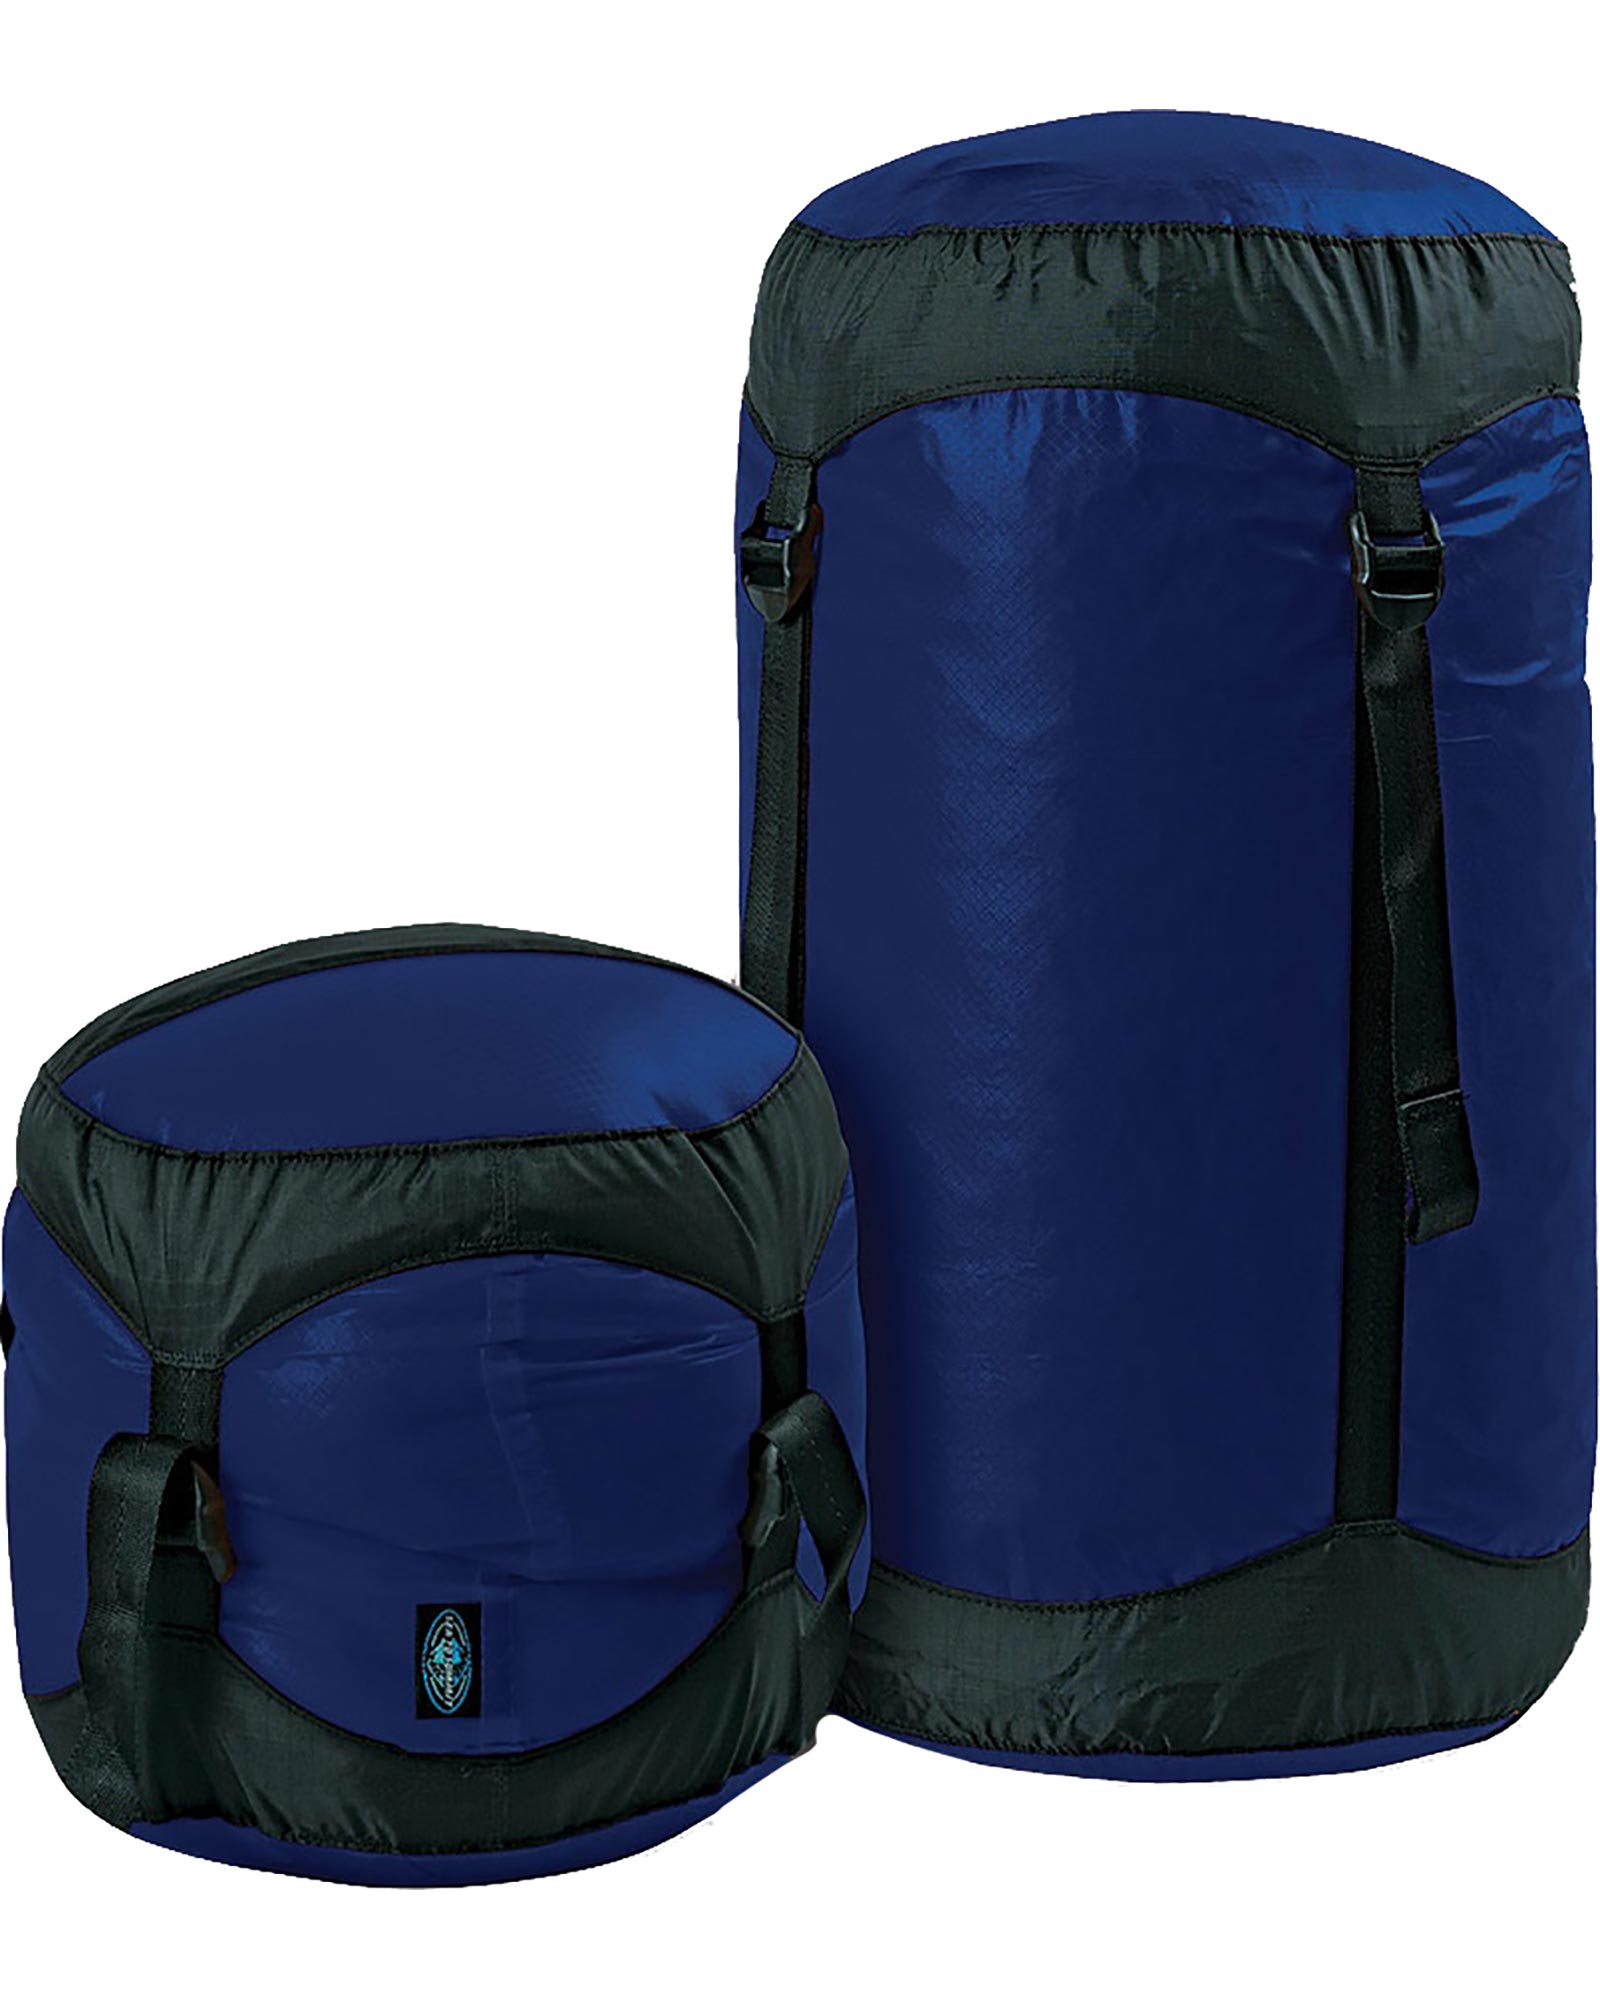 Sea to Summit Ultra Sil Comp Sack Large (20L) - Blue